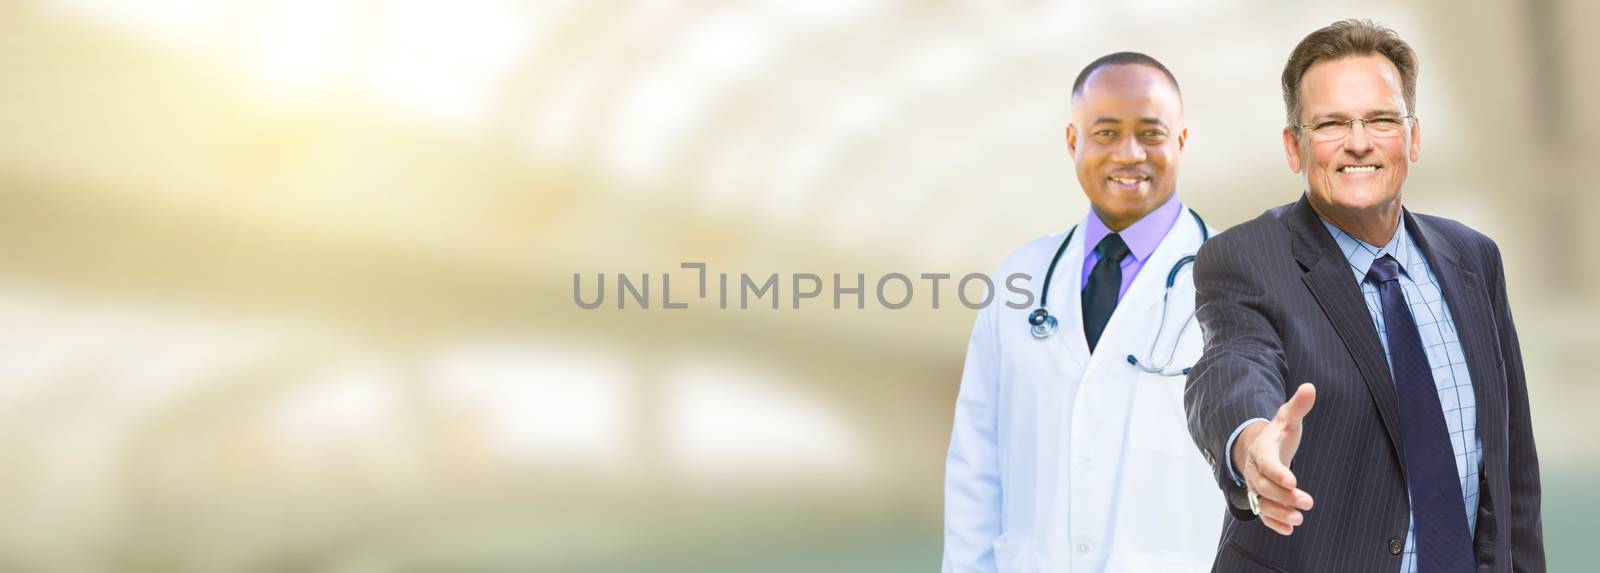 Caucasian Businessman and African American Male Doctor, Nurse or Pharmacist with Room For Text.